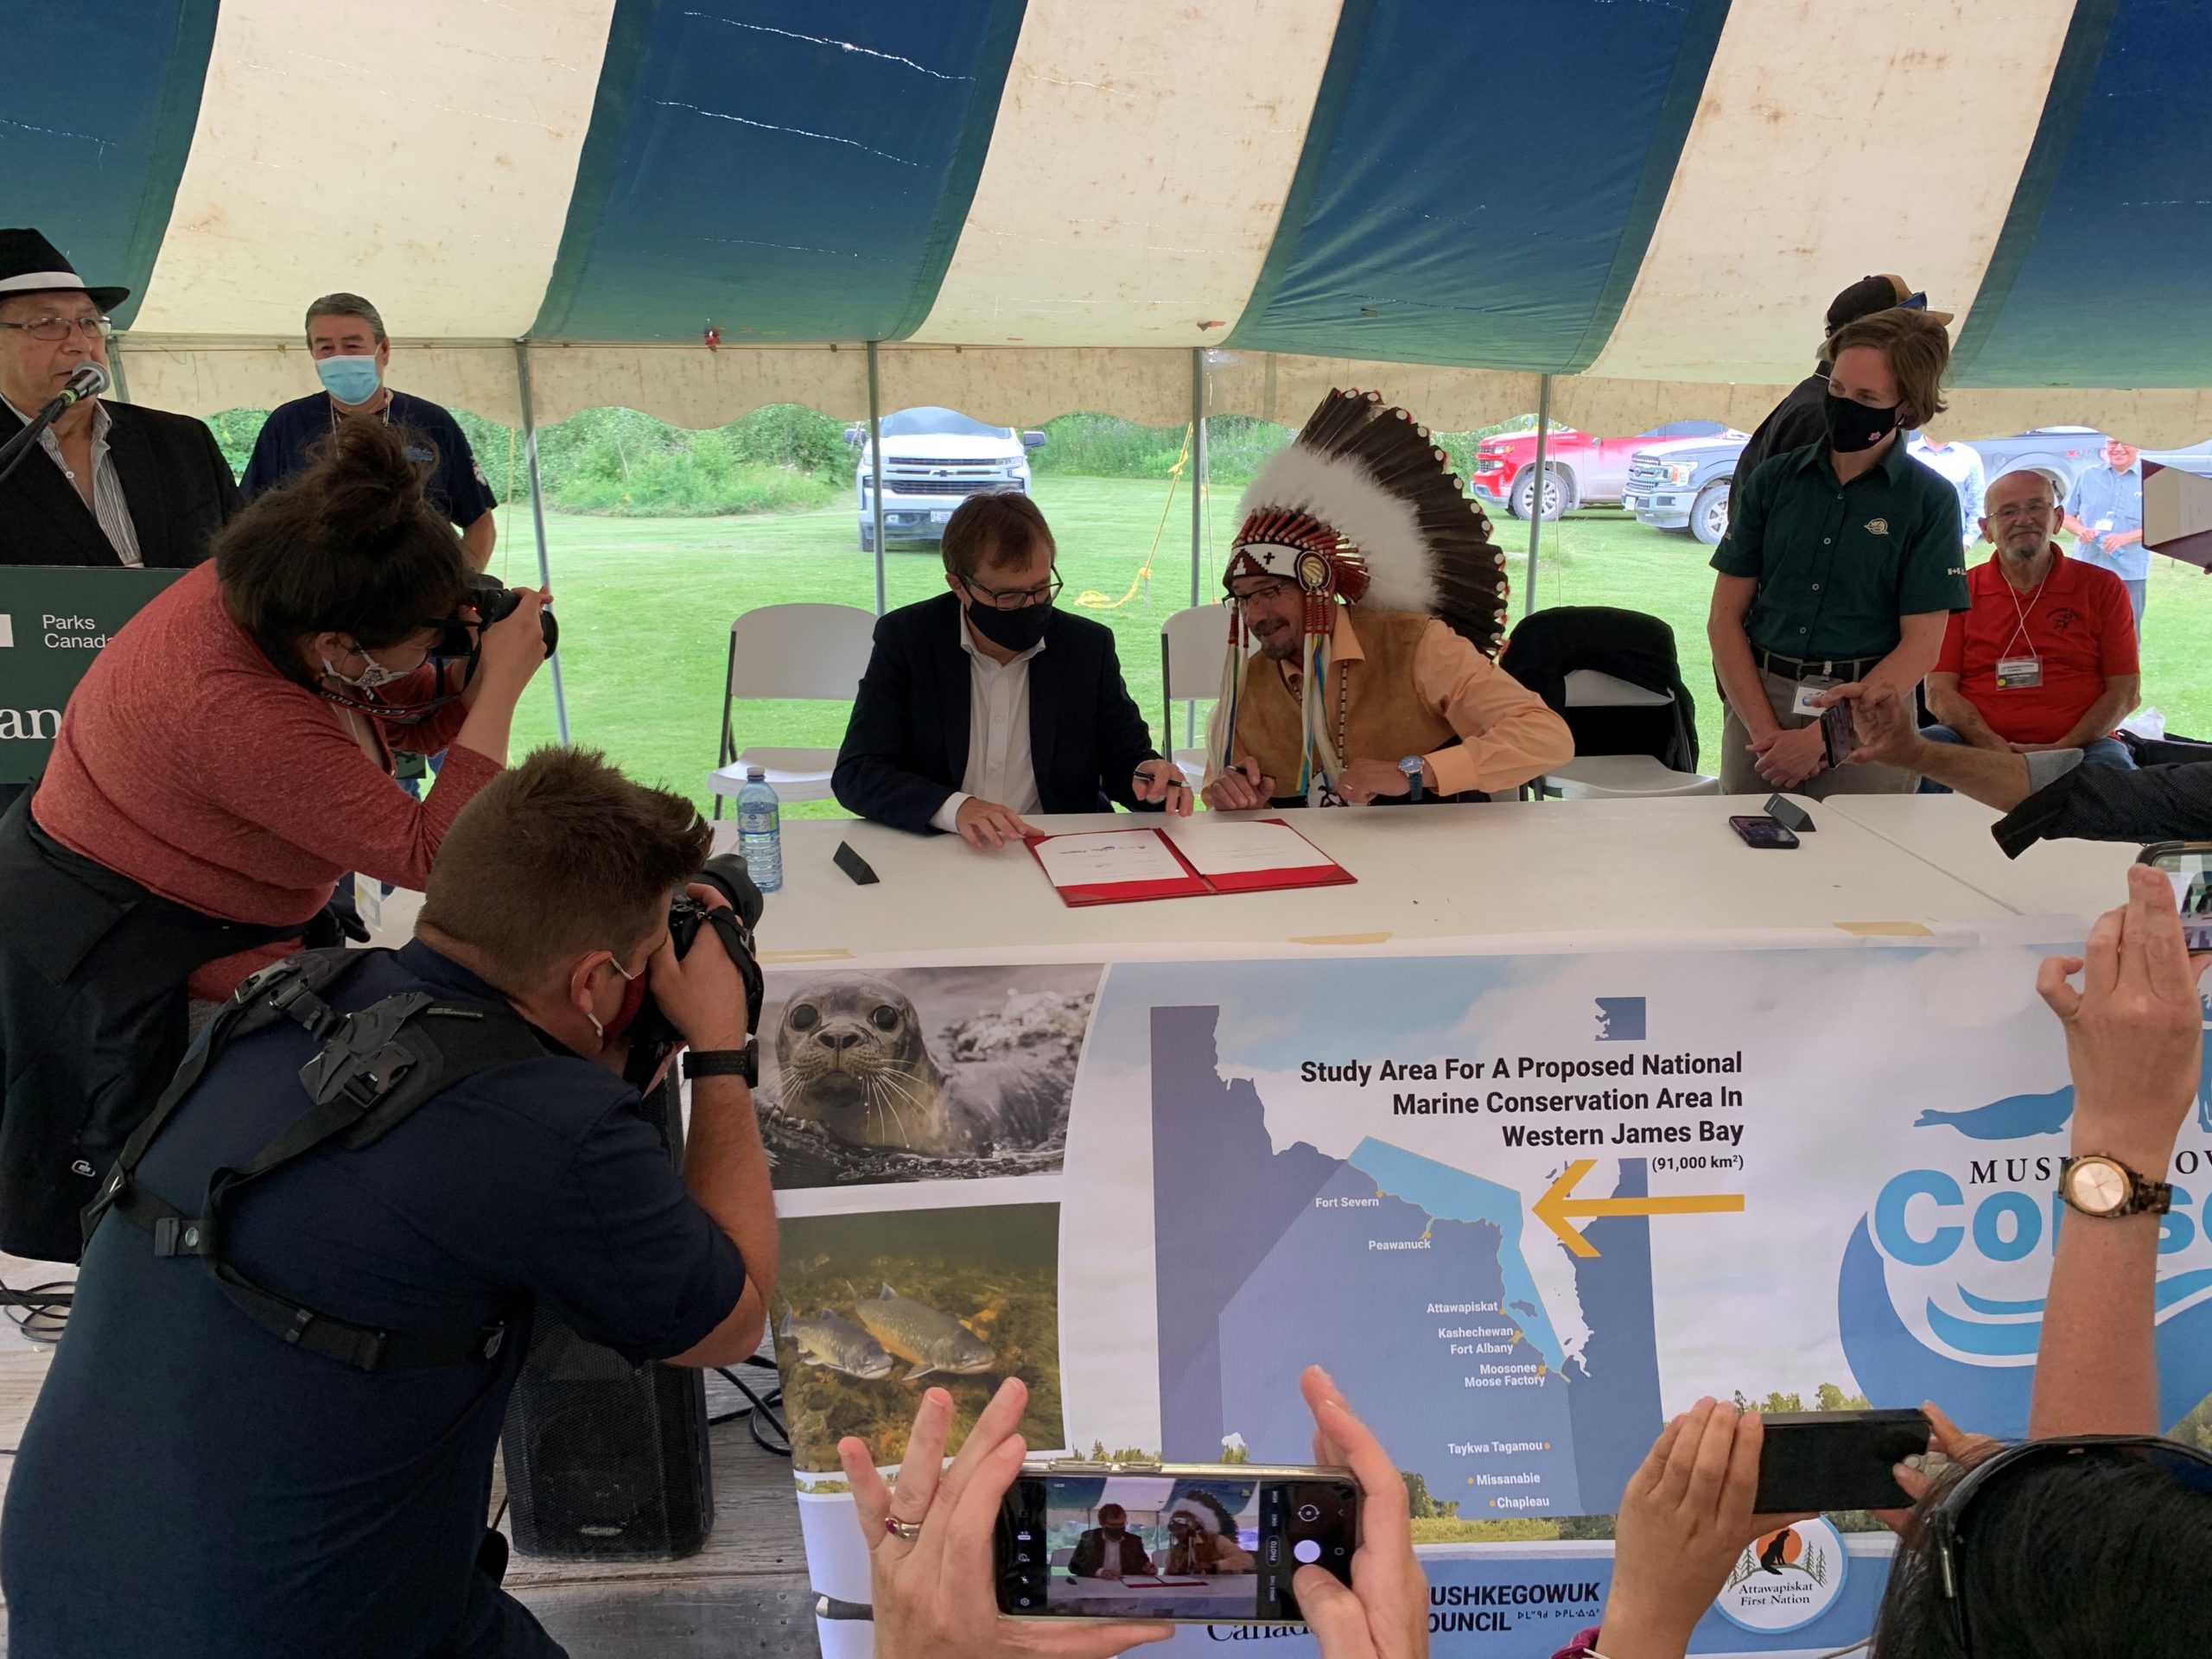 Grand Chief Solomon and Minister Wilkinson sign a MOU to assess the feasibility of a National Marine Conservation area in western James Bay and southwestern Hudson Bay.